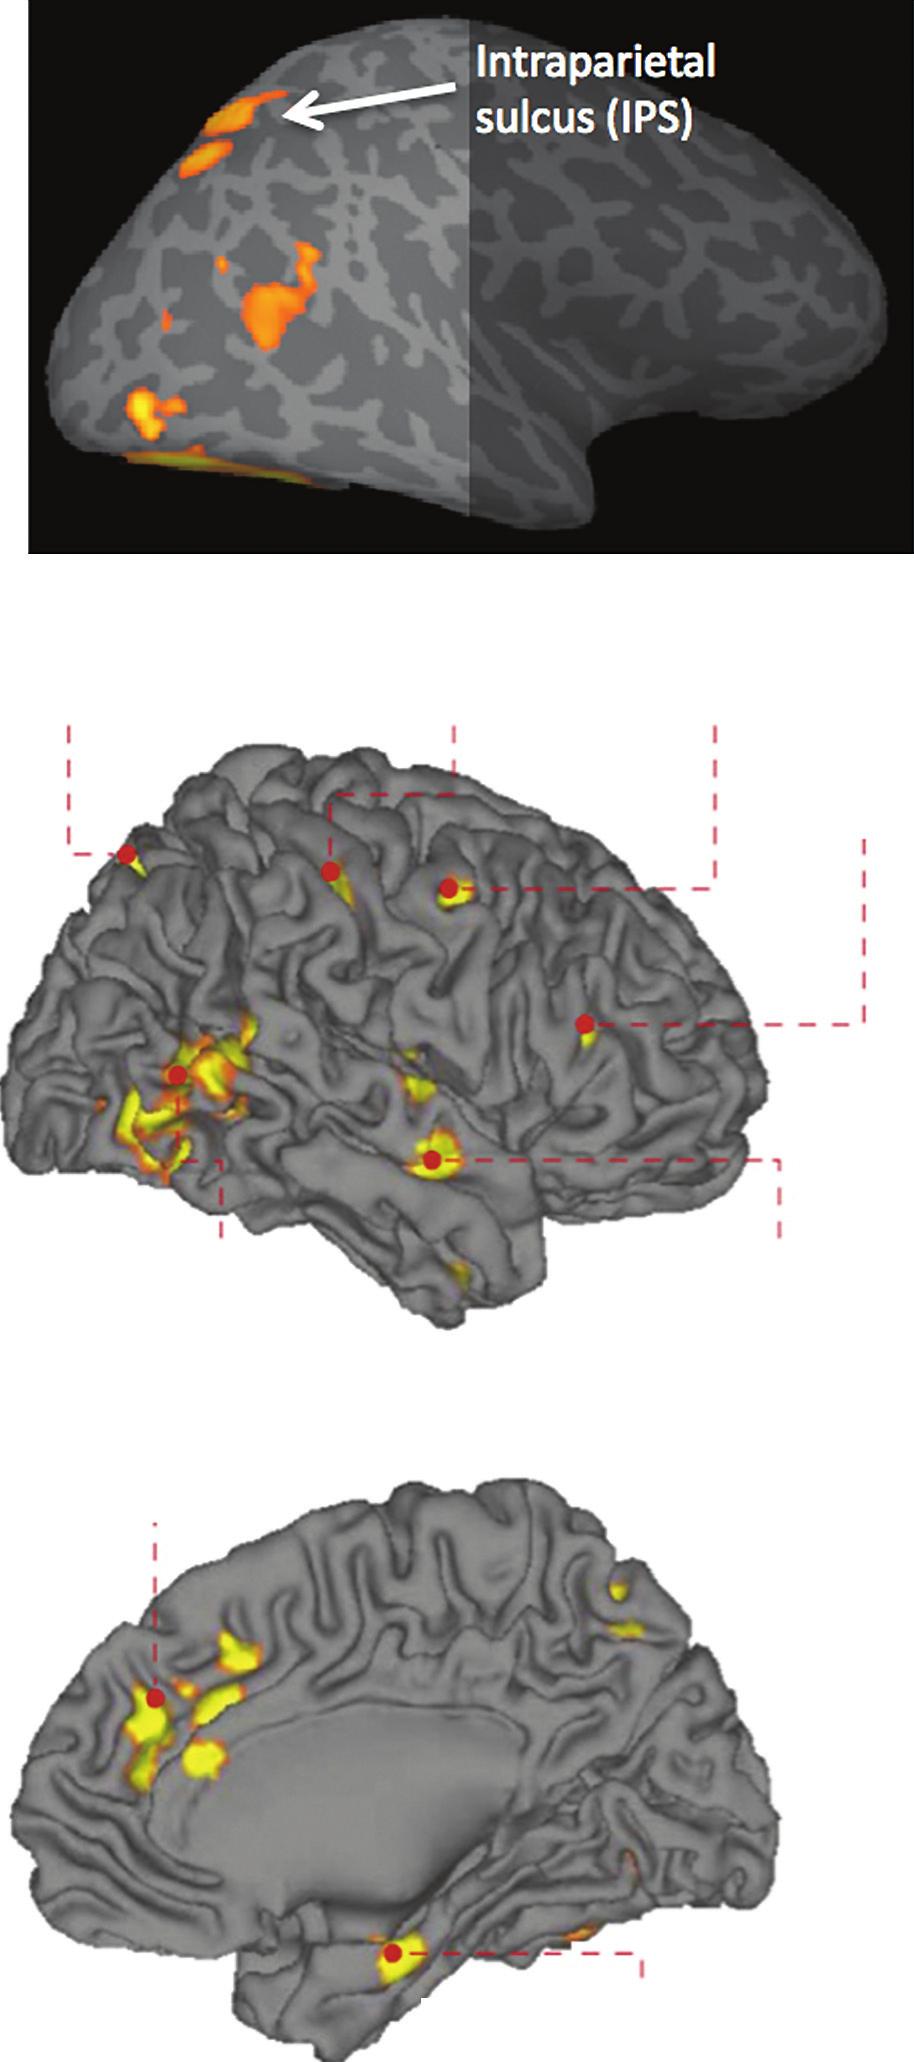 104 DISTRIBUTED NEURAL SYSTEMS FOR FACE PERCEPTION (a) Superior parietal lobule (b) Postcentral sulcus Frontal eye field Inferior frontal cortex C6.F8 Fig. 6.